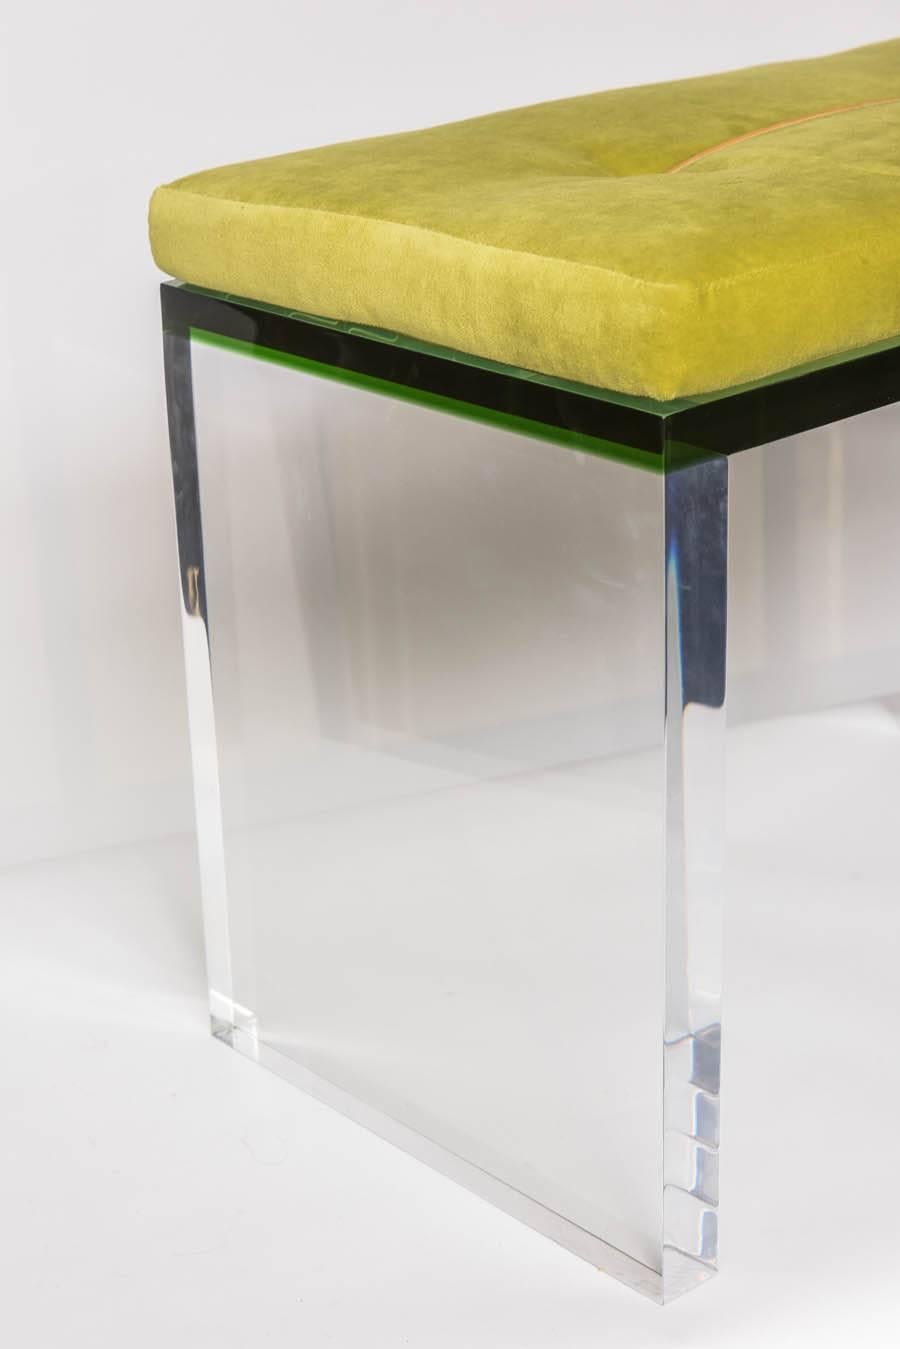 Two-toned Lucite custom designed bench with cushion affixed by leather strapping which ties to underside of bench seat (see detail pics).

Note: Matching desk/console available, sold separately.

This item is currently in our Miami showroom.